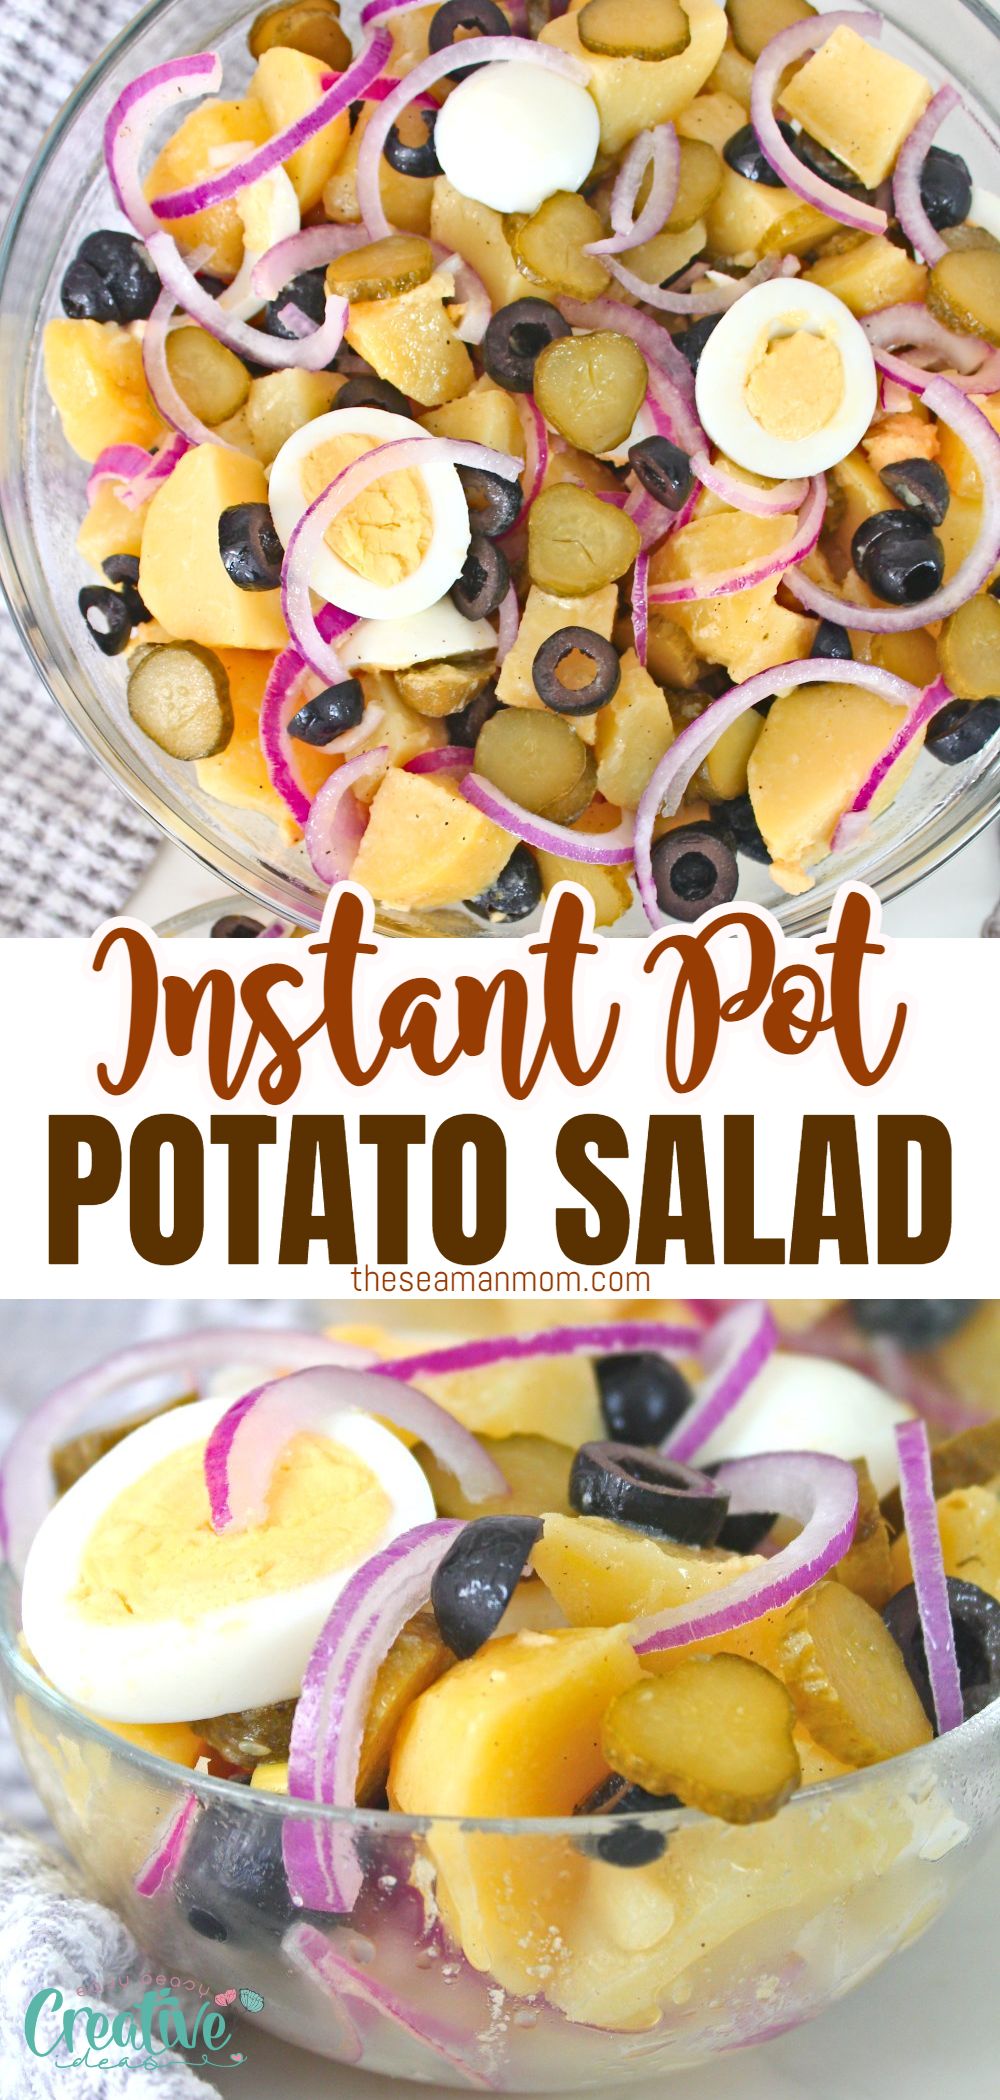 You want to make potato salad, but don't want to deal with the hassle of boiling potatoes on the stove. I've got you covered! My recipe for Instant Pot Potato Salad is simple and delicious, and it's sure to be a hit at your next potluck or BBQ. via @petroneagu